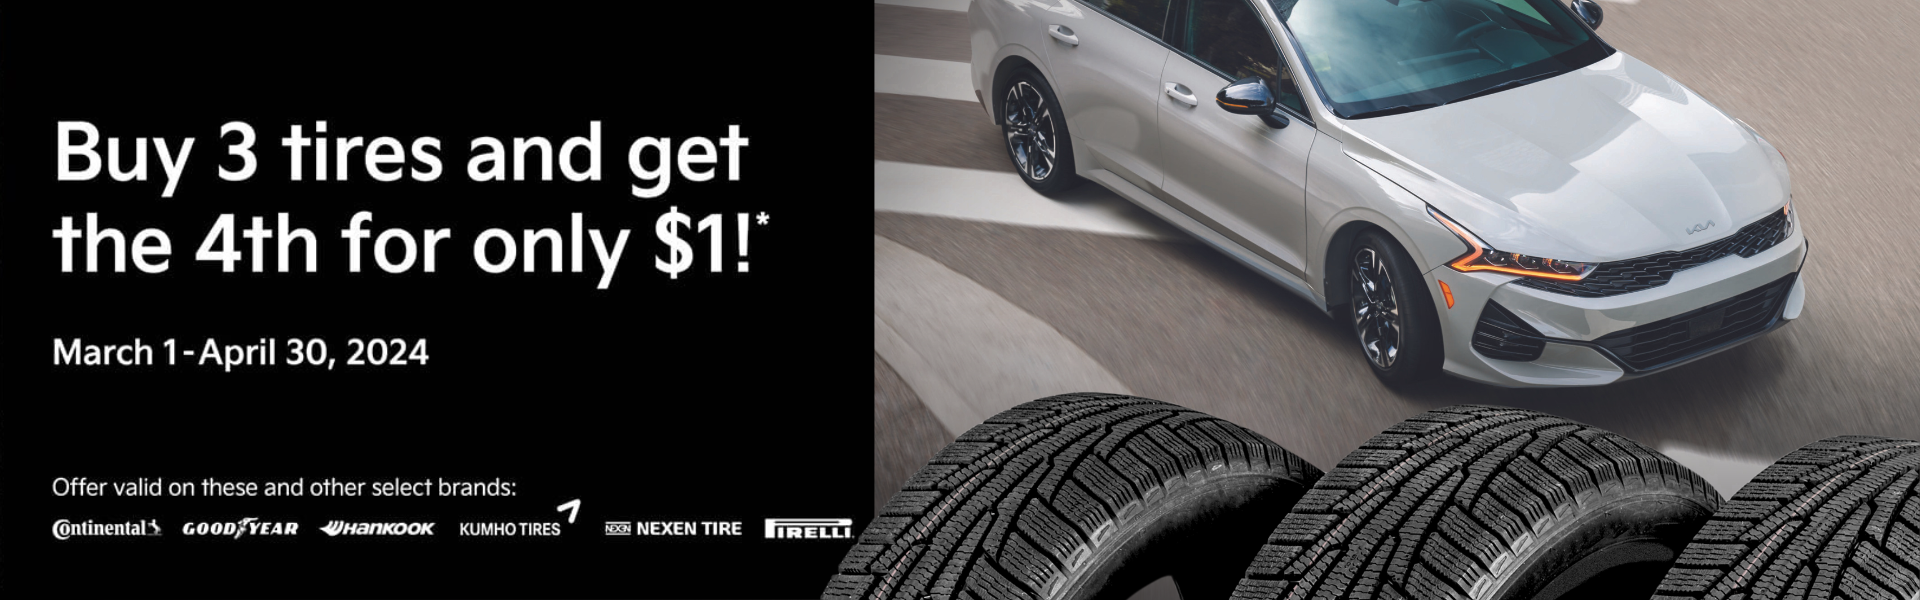 Buy 3 Tires Get 4th for $1